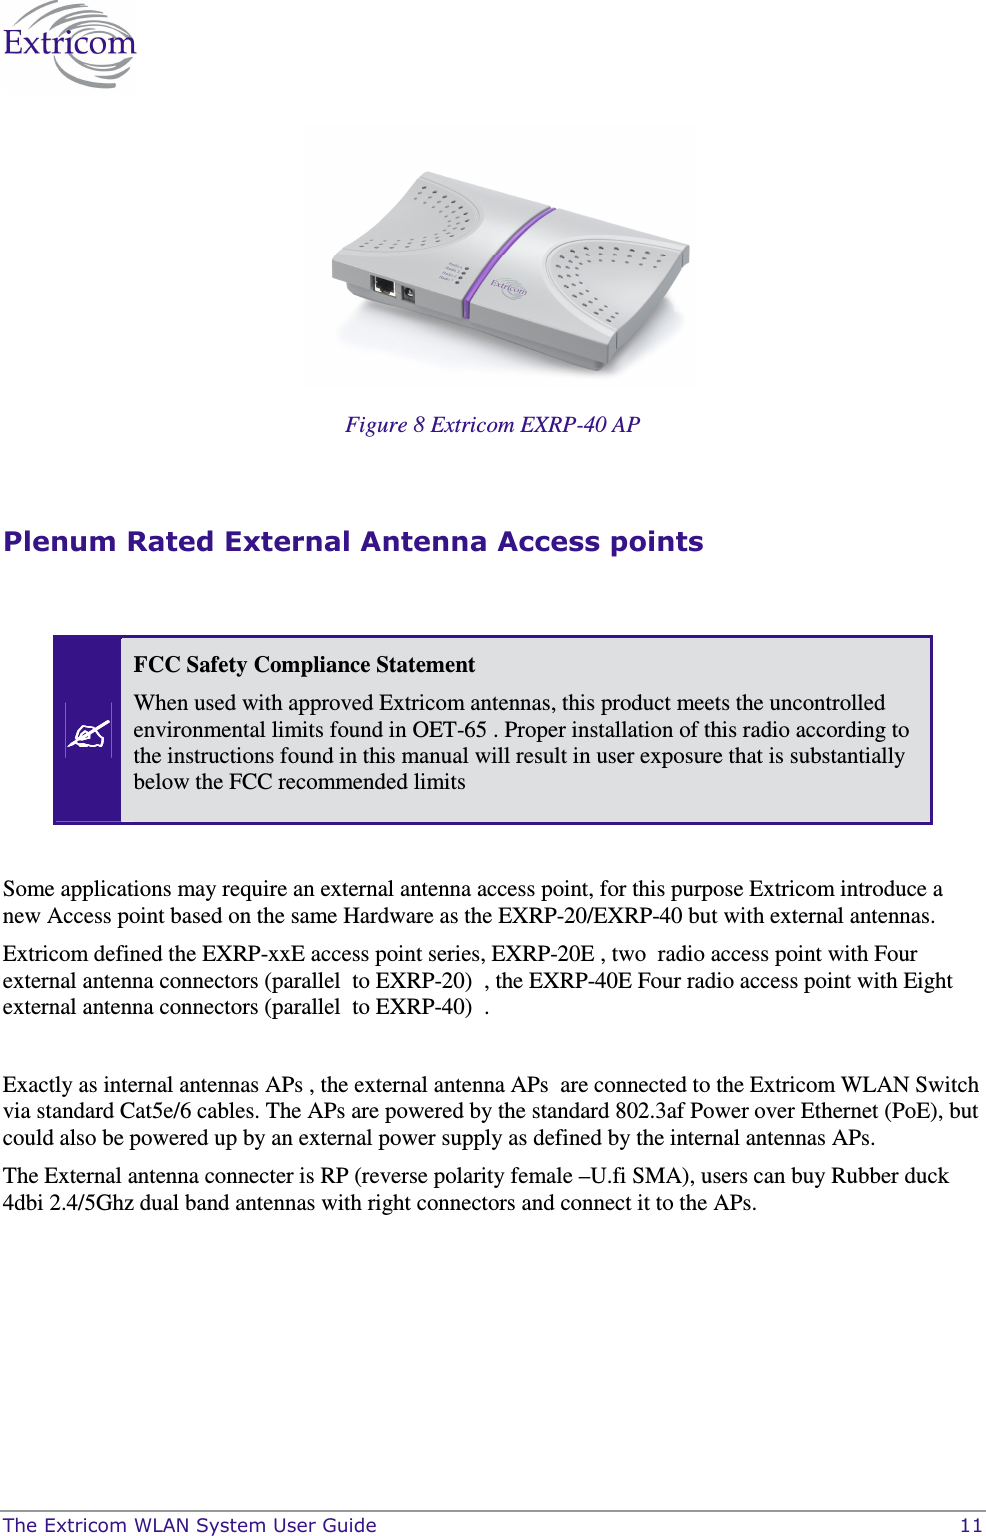  The Extricom WLAN System User Guide    11  Figure 8 Extricom EXRP-40 AP   Plenum Rated External Antenna Access points     FCC Safety Compliance Statement When used with approved Extricom antennas, this product meets the uncontrolled environmental limits found in OET-65 . Proper installation of this radio according to the instructions found in this manual will result in user exposure that is substantially below the FCC recommended limits   Some applications may require an external antenna access point, for this purpose Extricom introduce a new Access point based on the same Hardware as the EXRP-20/EXRP-40 but with external antennas.   Extricom defined the EXRP-xxE access point series, EXRP-20E , two  radio access point with Four external antenna connectors (parallel  to EXRP-20)  , the EXRP-40E Four radio access point with Eight external antenna connectors (parallel  to EXRP-40)  .    Exactly as internal antennas APs , the external antenna APs  are connected to the Extricom WLAN Switch via standard Cat5e/6 cables. The APs are powered by the standard 802.3af Power over Ethernet (PoE), but could also be powered up by an external power supply as defined by the internal antennas APs.  The External antenna connecter is RP (reverse polarity female –U.fi SMA), users can buy Rubber duck 4dbi 2.4/5Ghz dual band antennas with right connectors and connect it to the APs.  